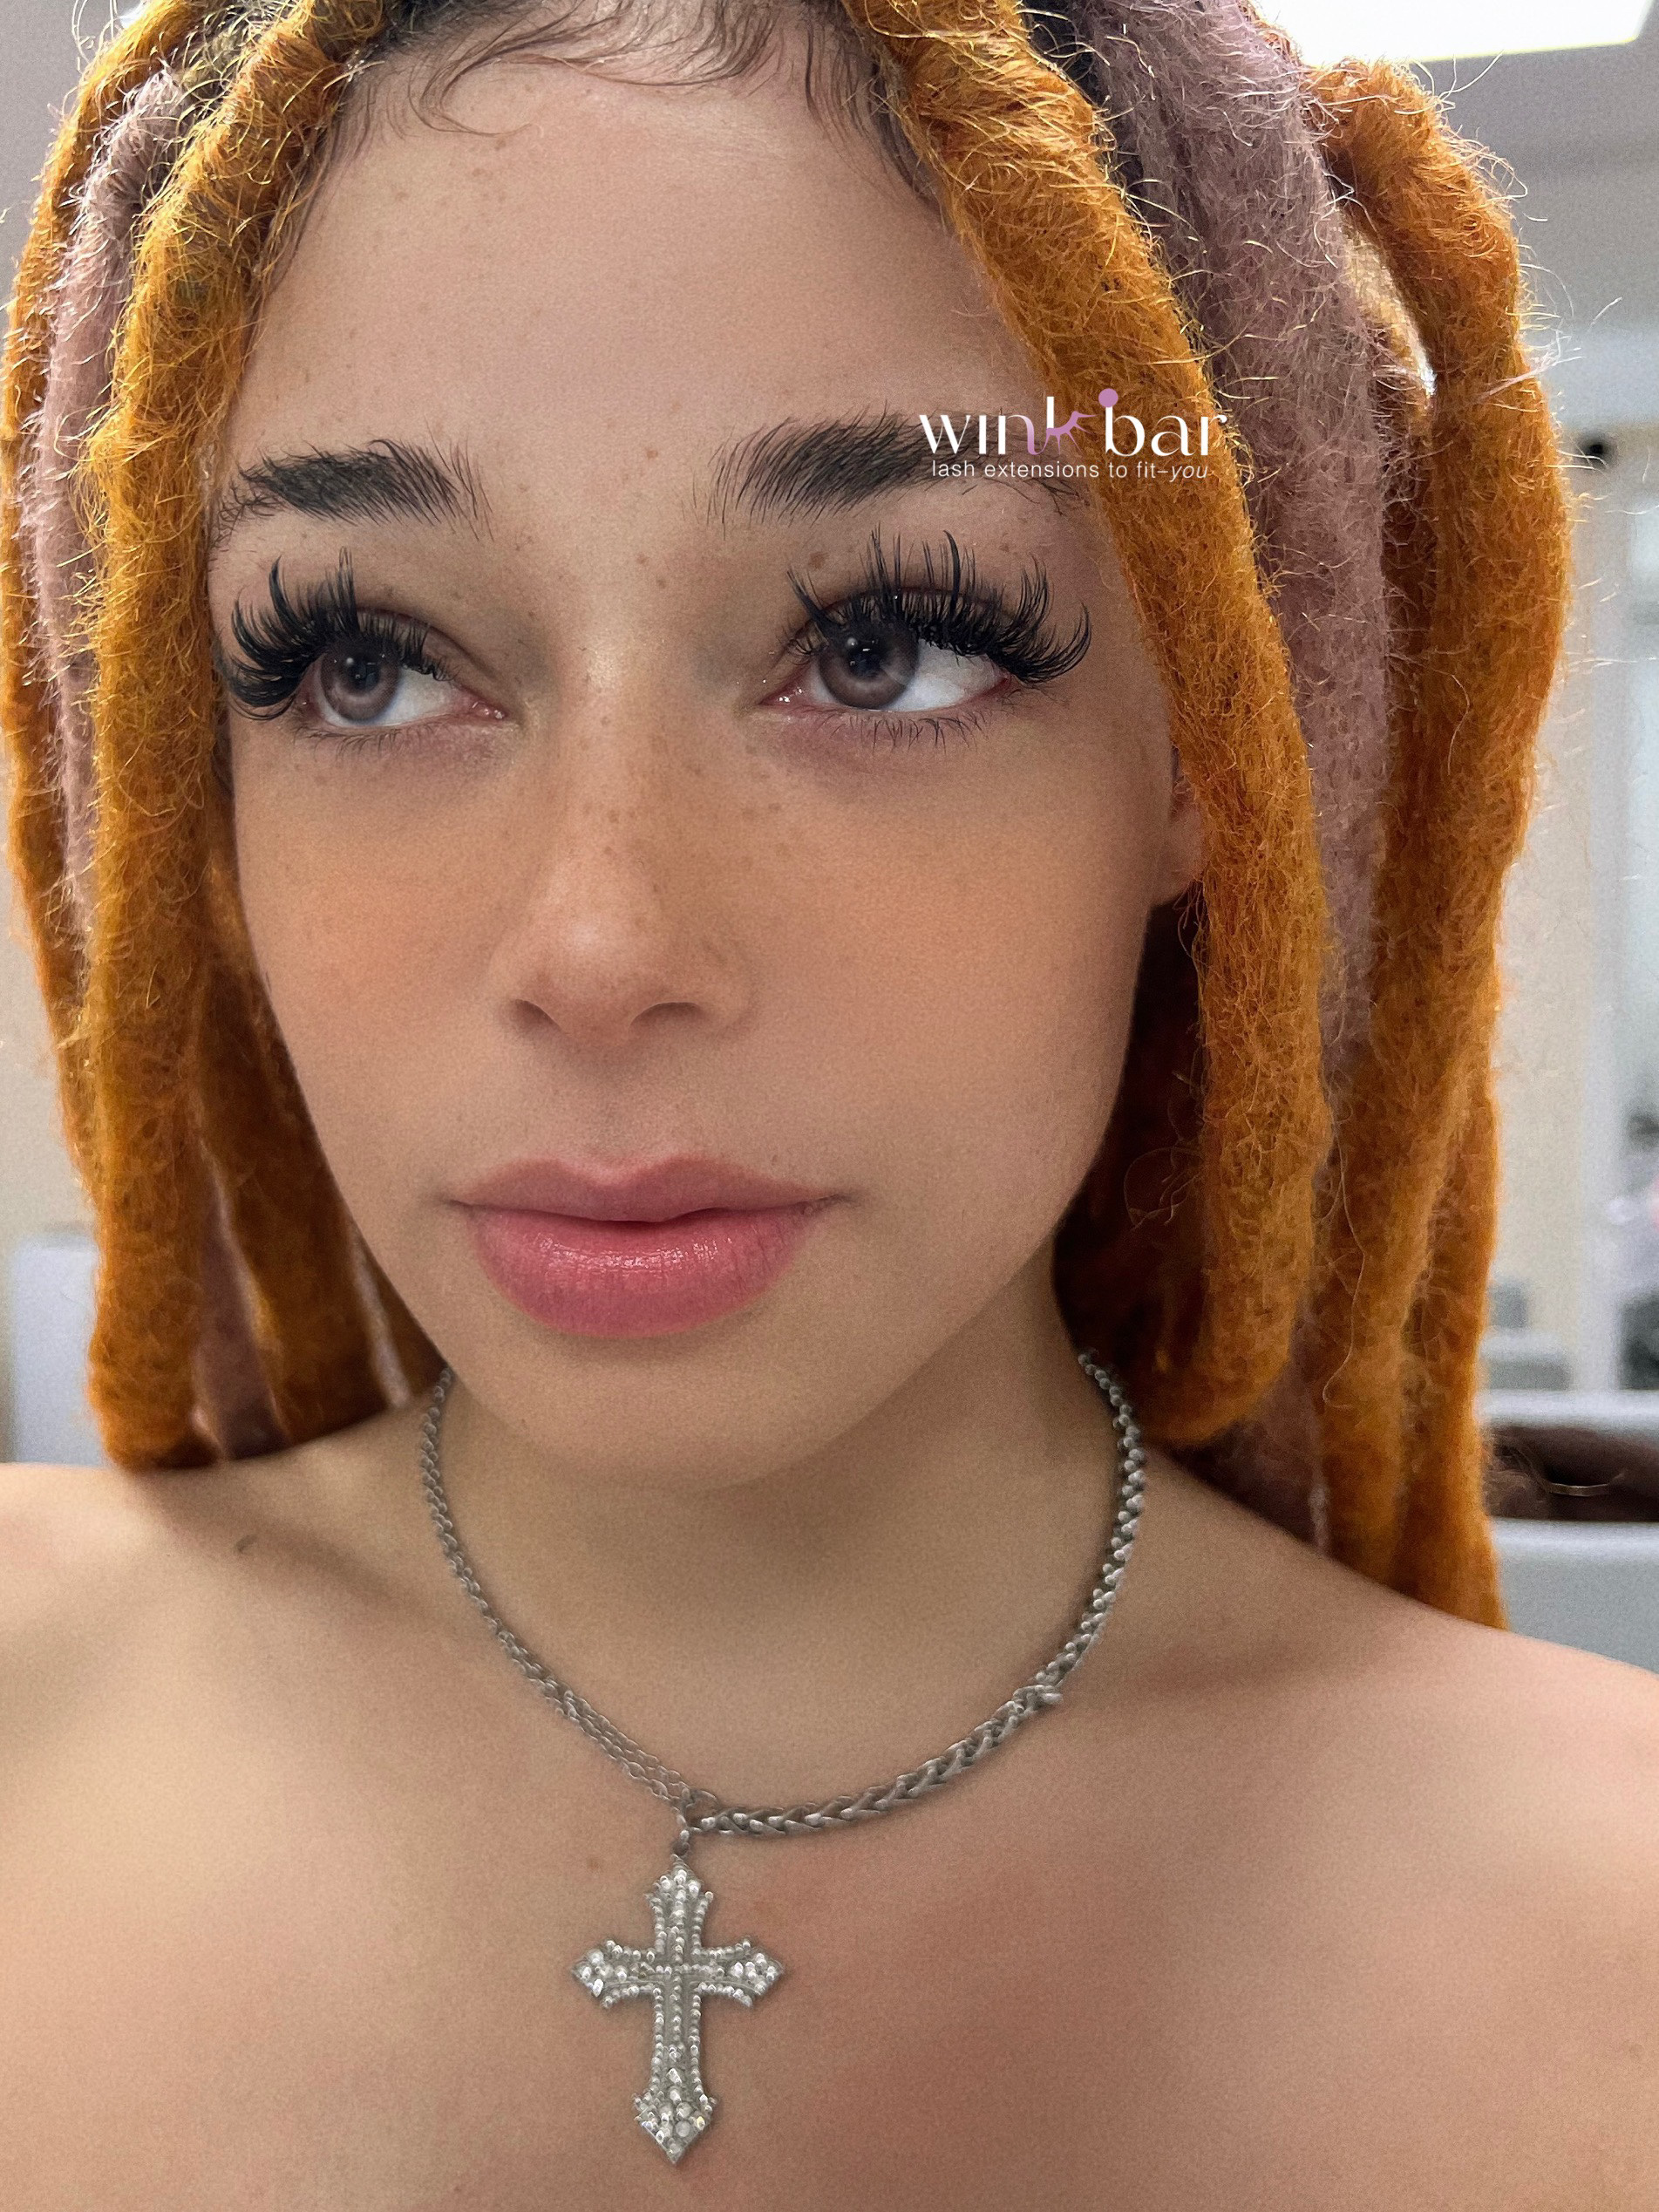 CannybeautylashesArcadiaLA on Instagram 6D Anime style eyelash  extensions Top wispy  cute  done by cannybeautylashesarcadia First  time New client special get 35 OFF